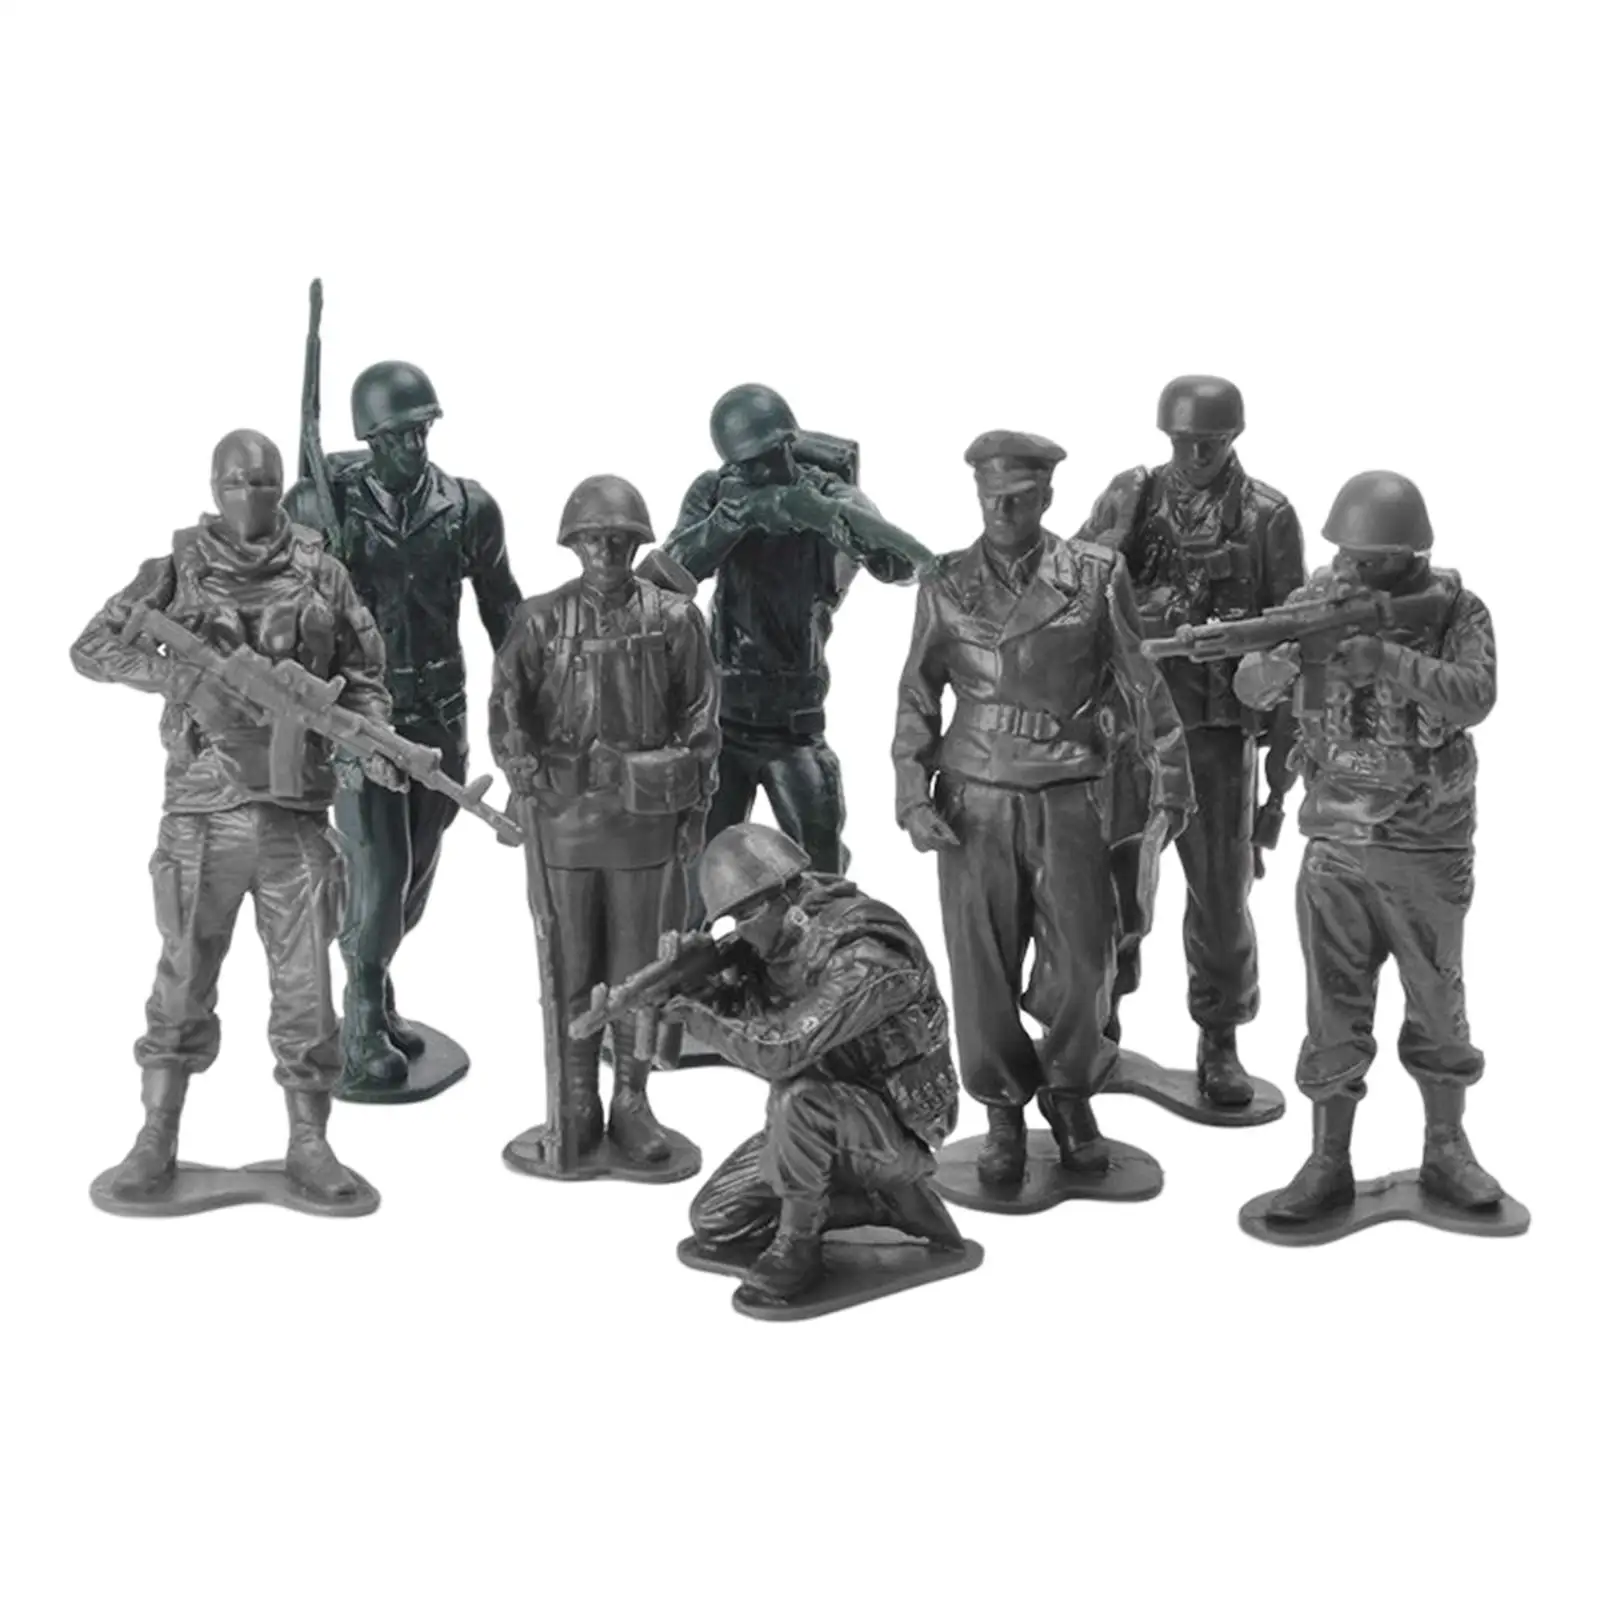 

8x 1/18 Action Figure Toy Soldiers Playset Diorama Sand Table Decor Scenery Soldiers Figurines Model for Teens Children Boys